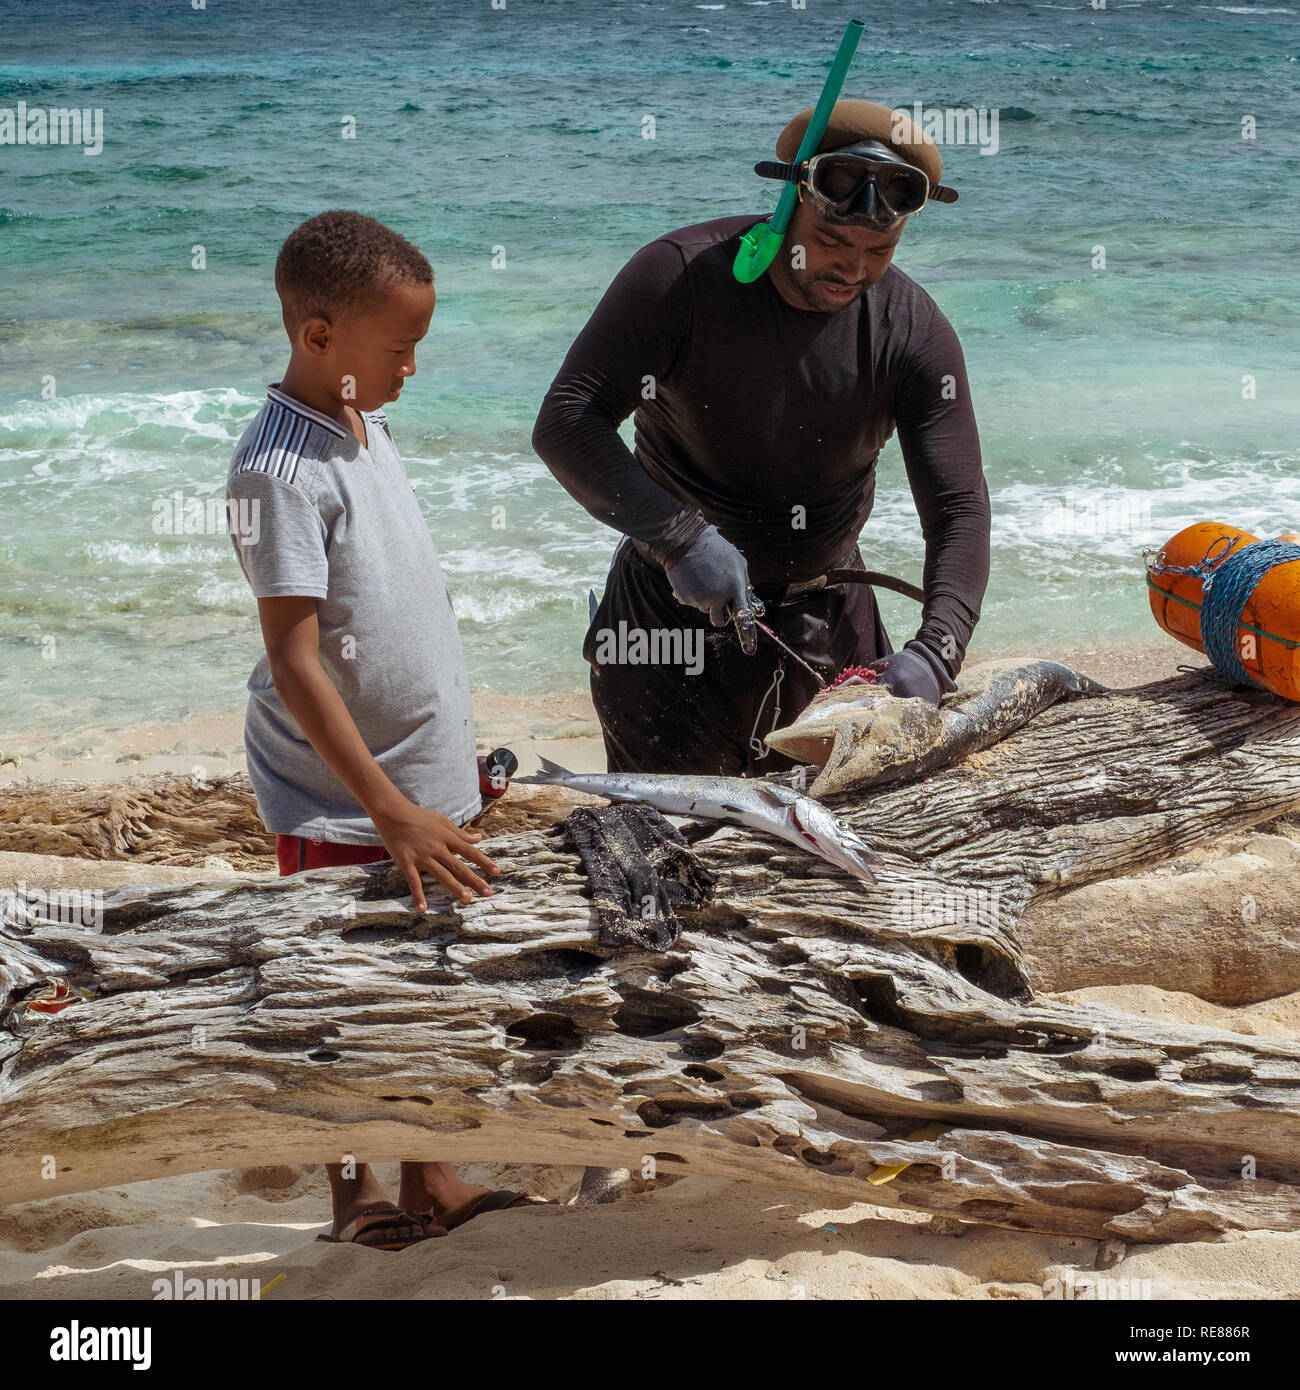 01-08-2019; San Andrés island, Colombia. Kid is watching inhabitant fisherman which is cleaning a barracuda hunted in the reef. Stock Photo